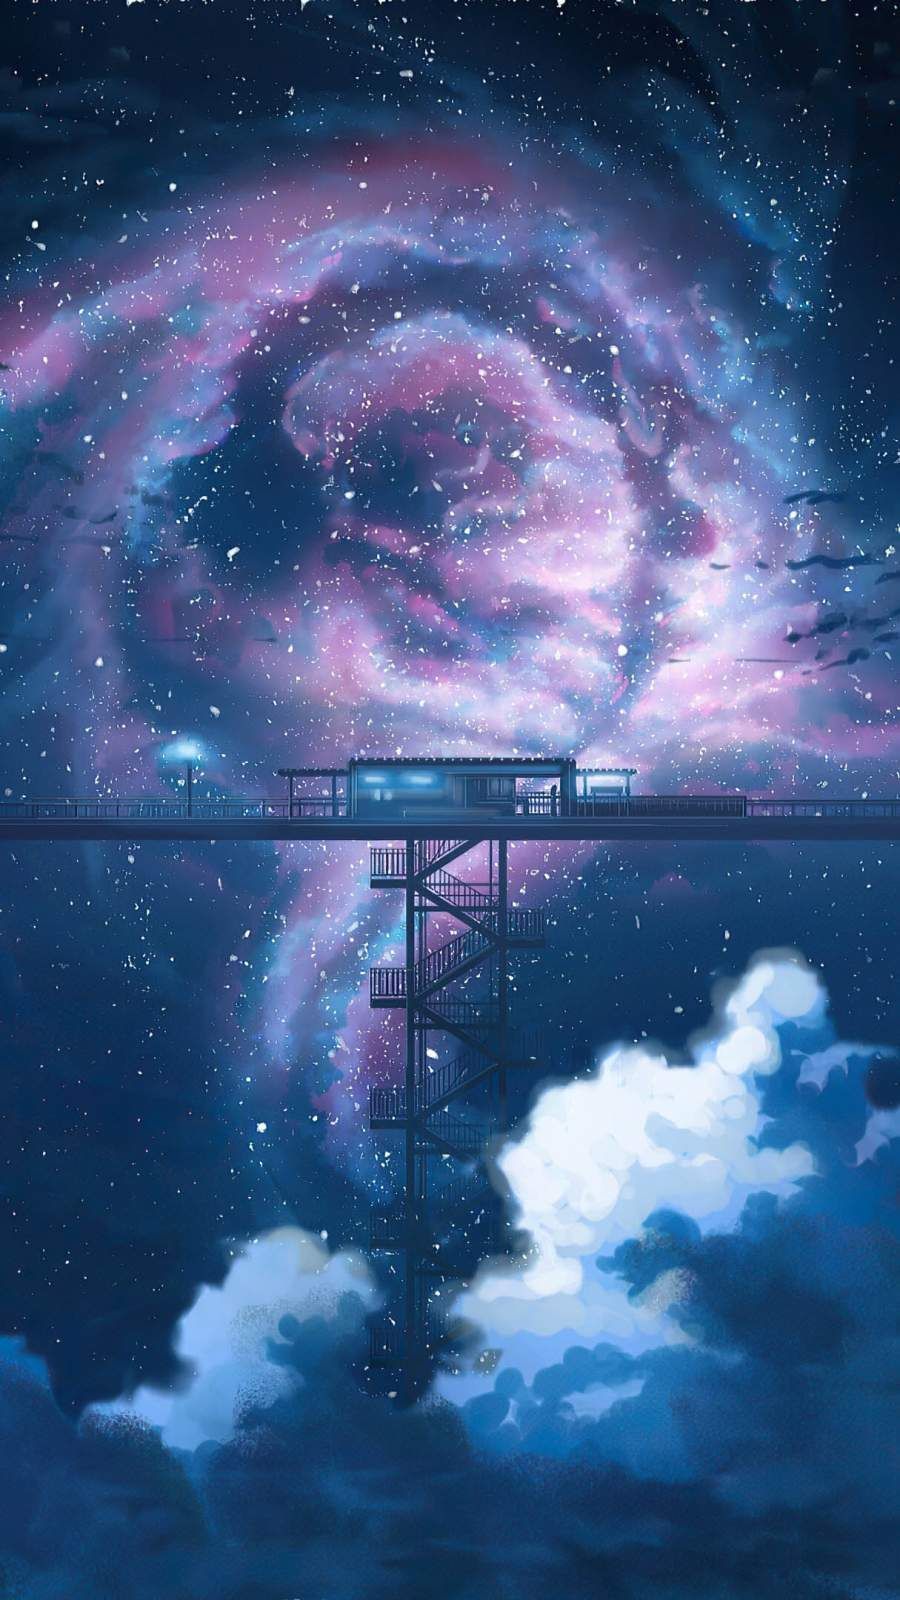 iPhone Wallpaper for iPhone iPhone iPhone X, iPhone XR, iPhone 8 Plus High Quality Wallpaper, iPad Ba. Night scenery, Sky anime, Anime scenery wallpaper